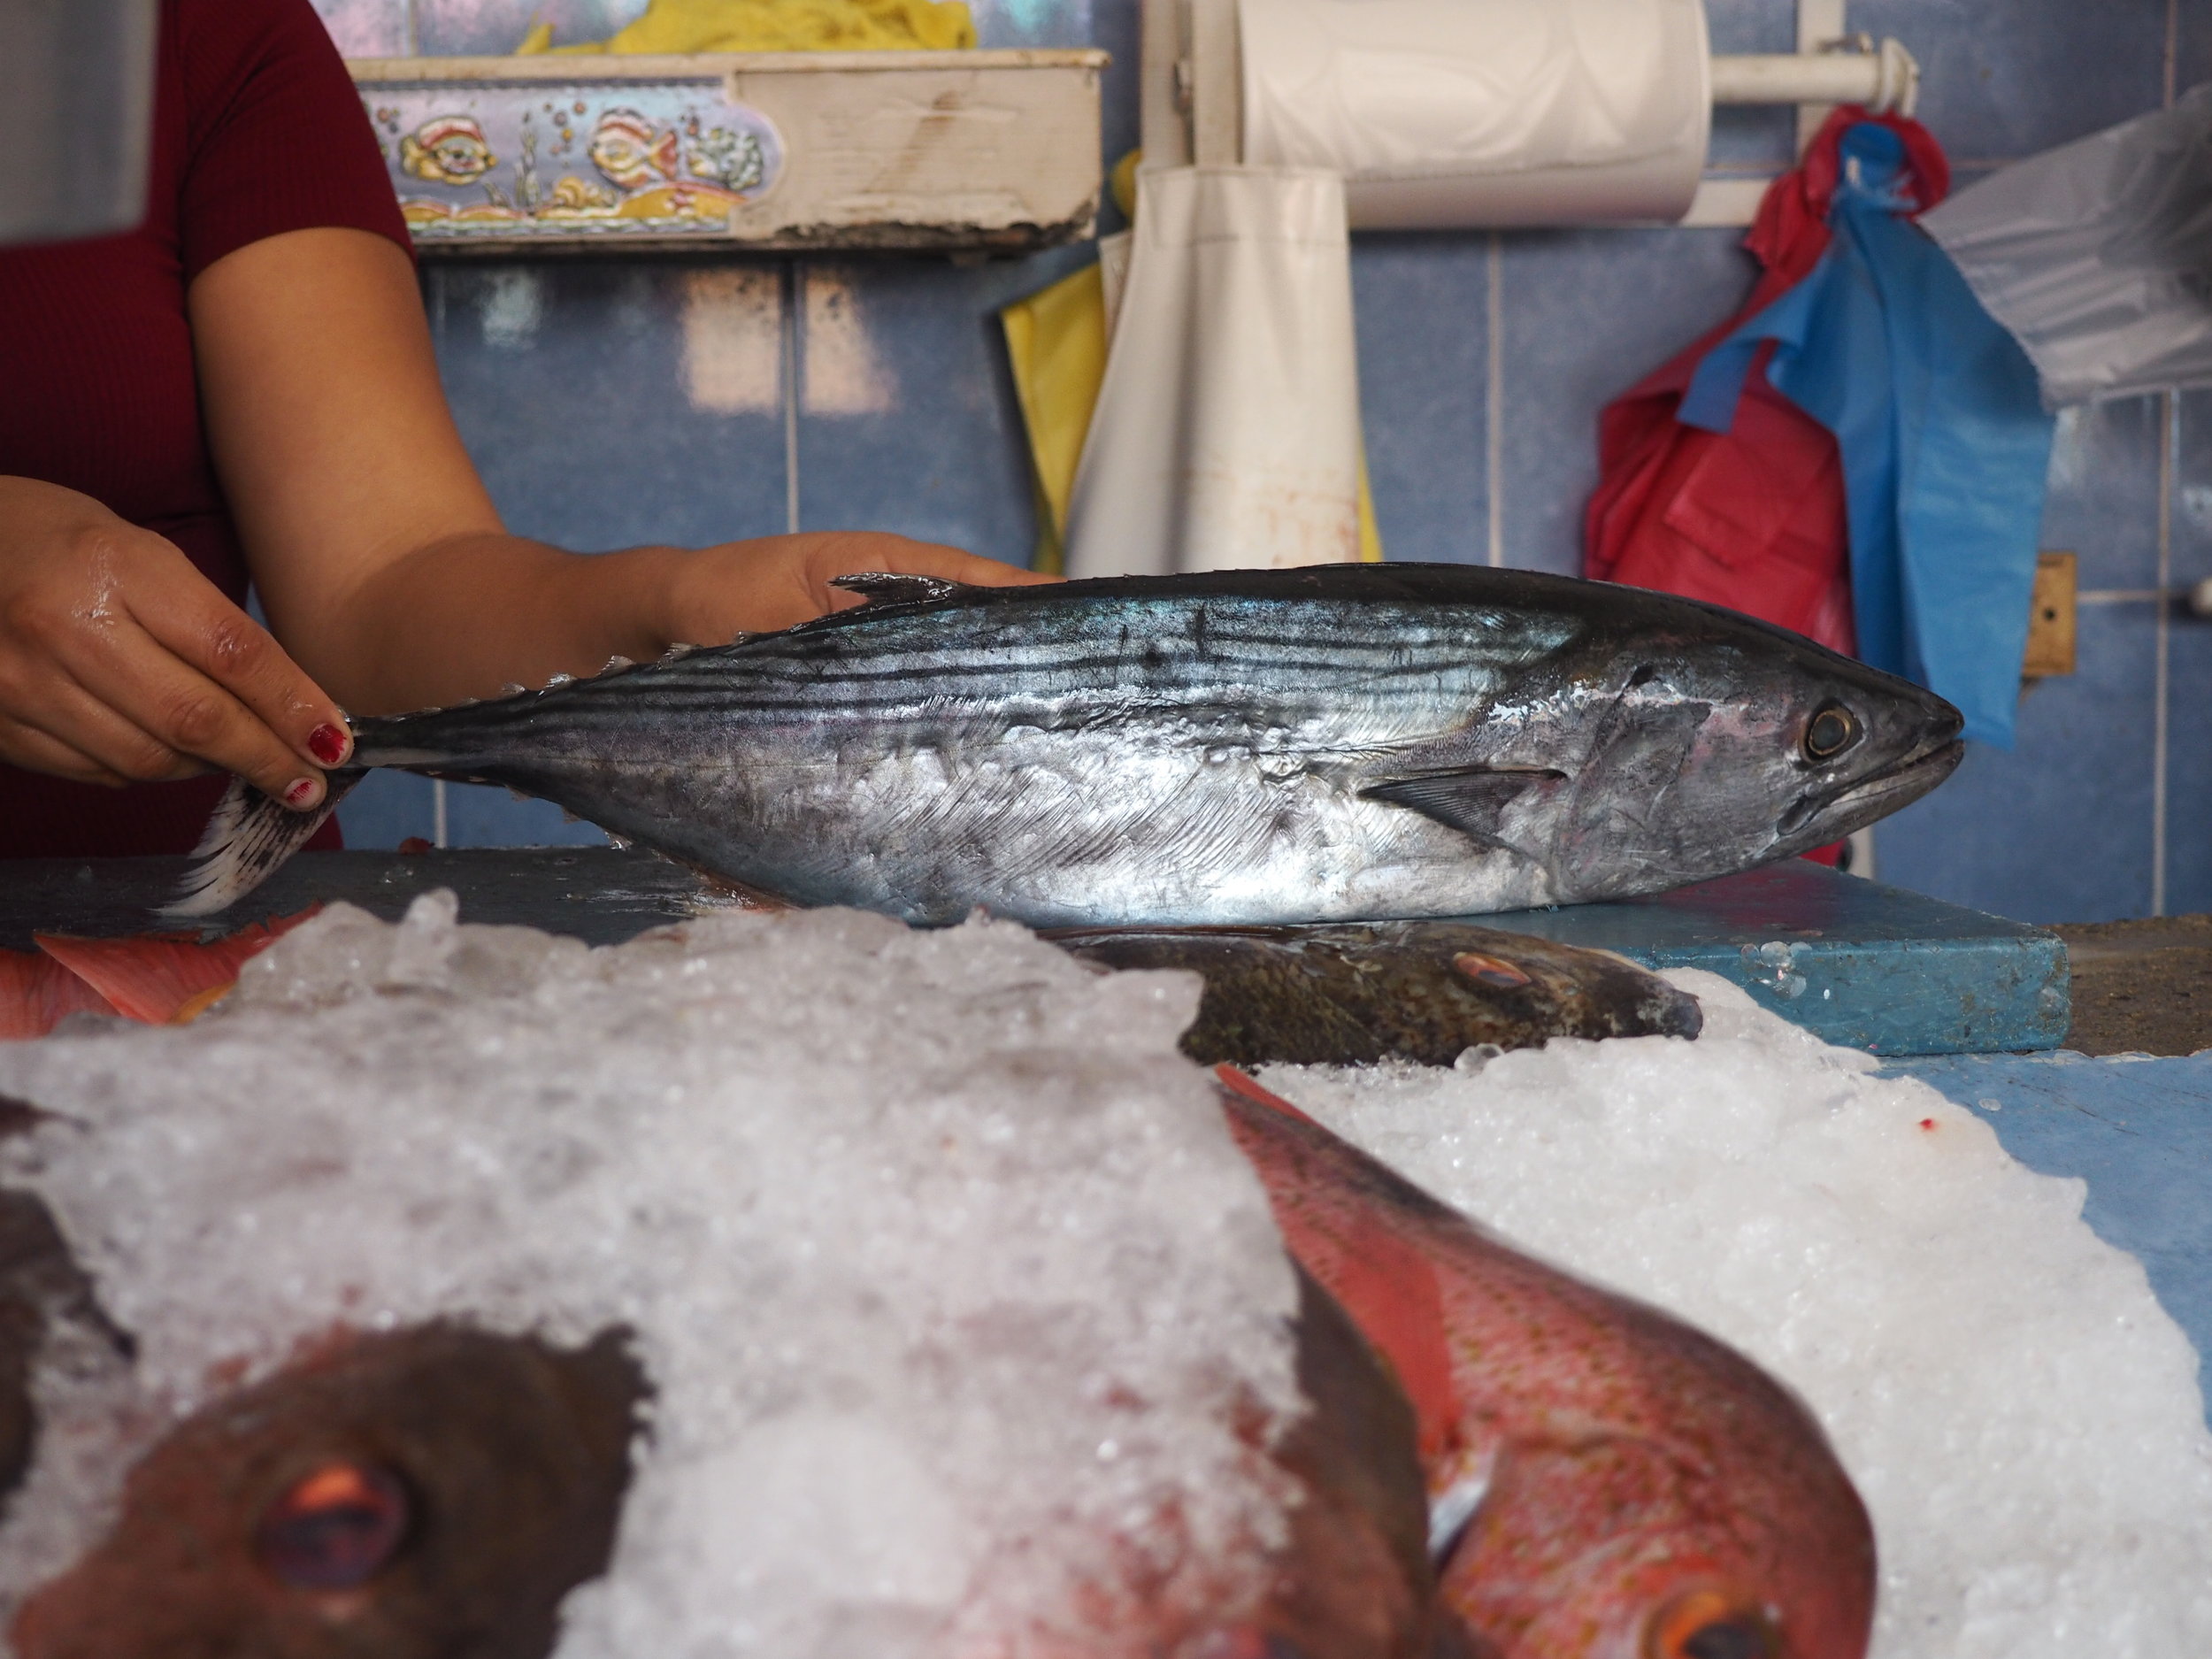 Bonita fish, which we used for ceviche